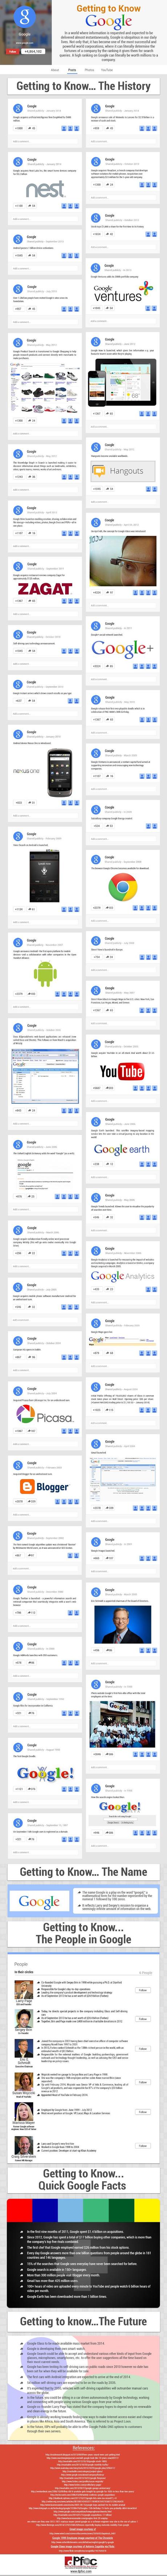 Get to know Google